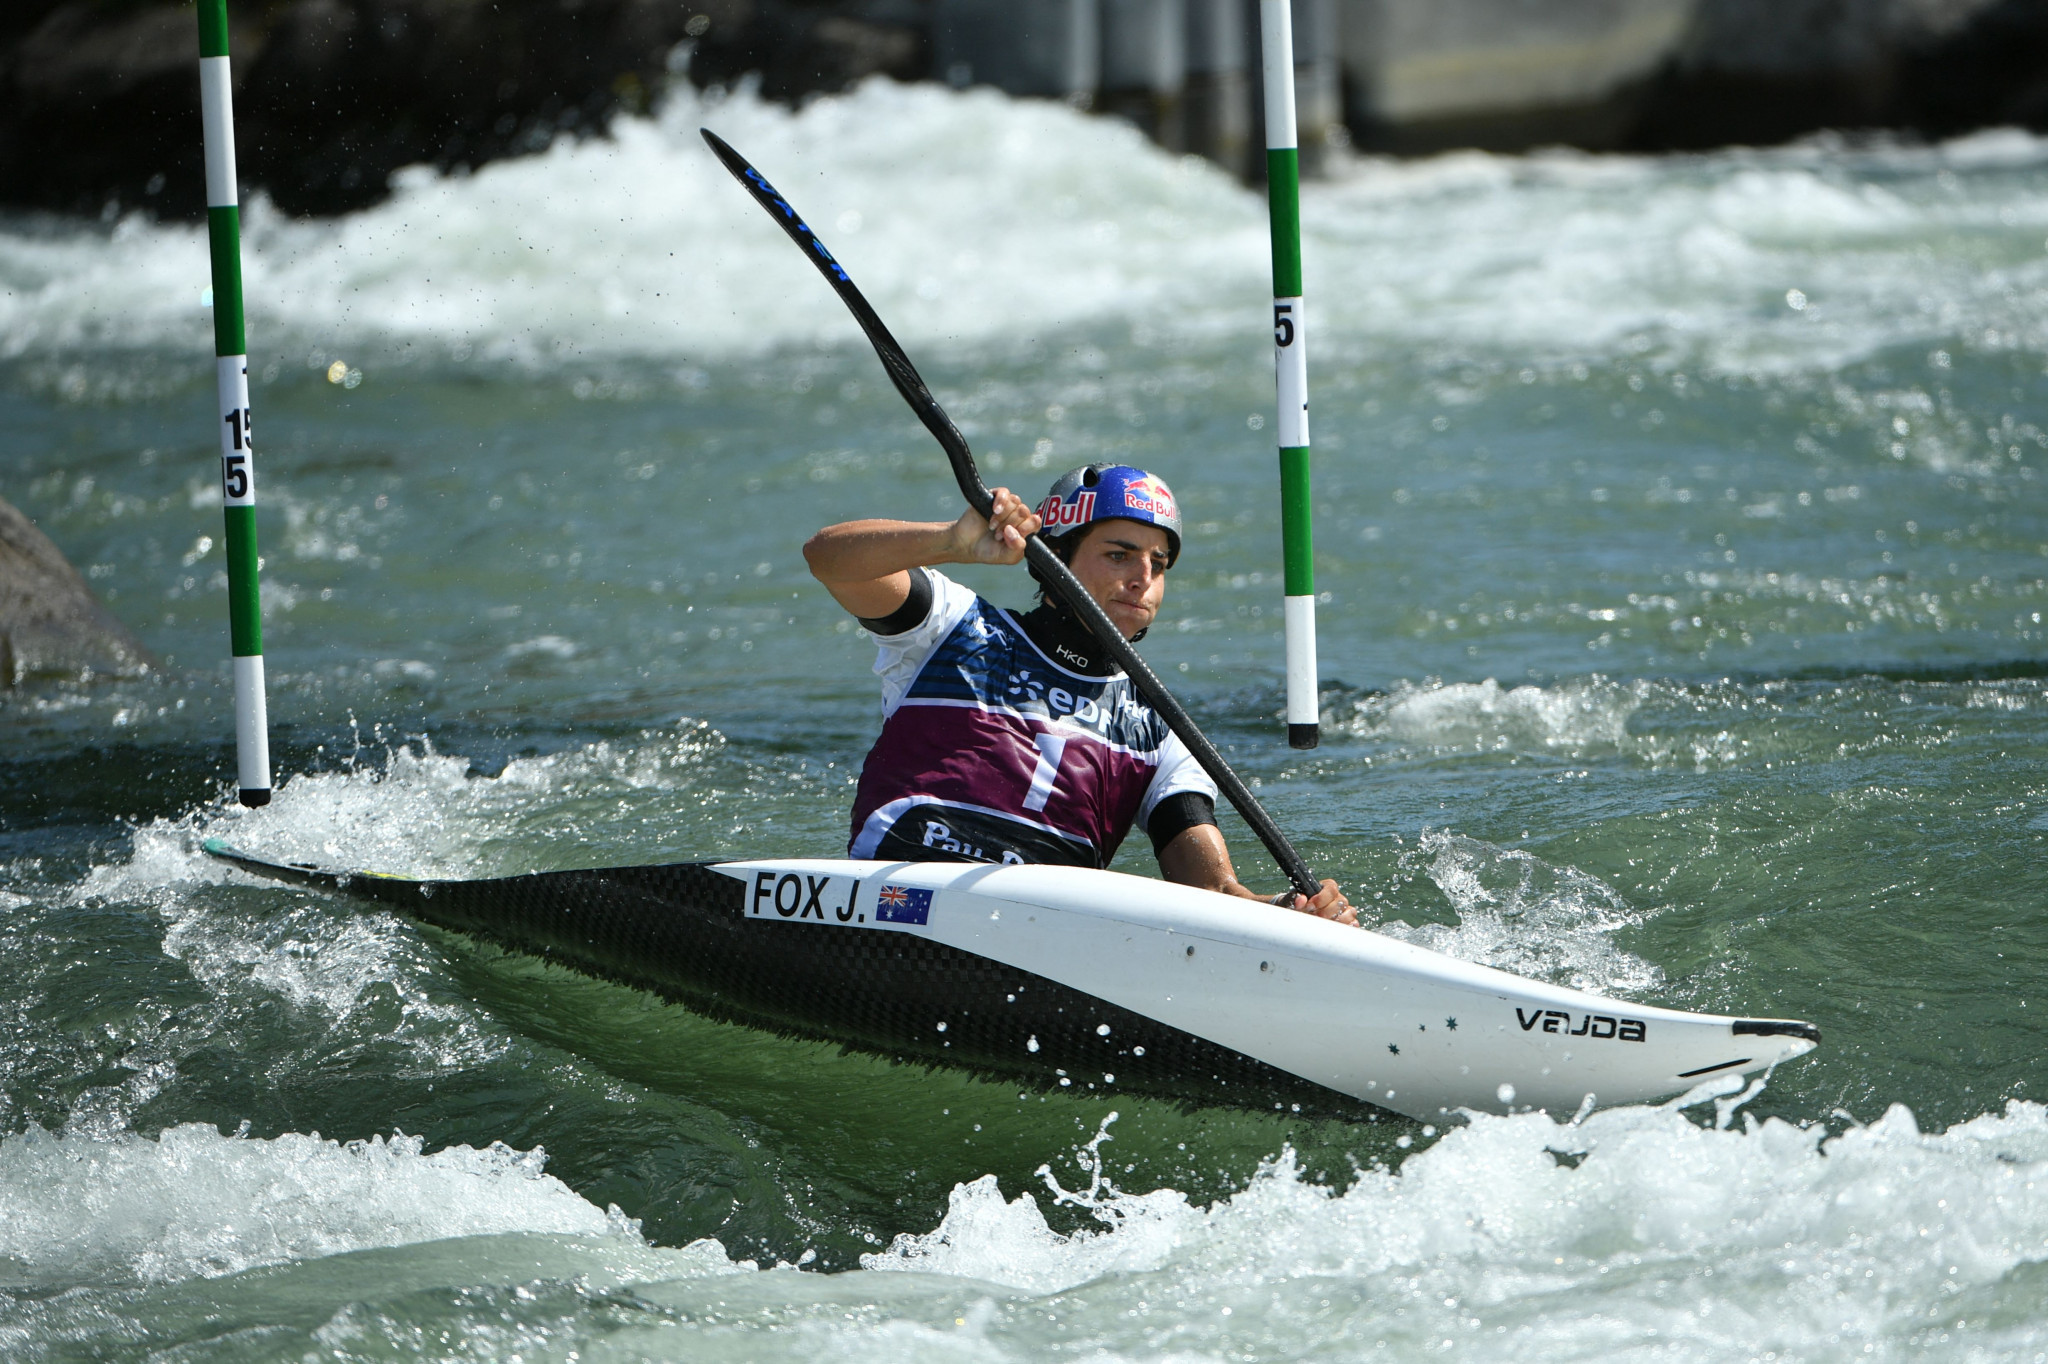 All titles remaining up for grabs at ICF Canoe Slalom World Cup Final in La Seu